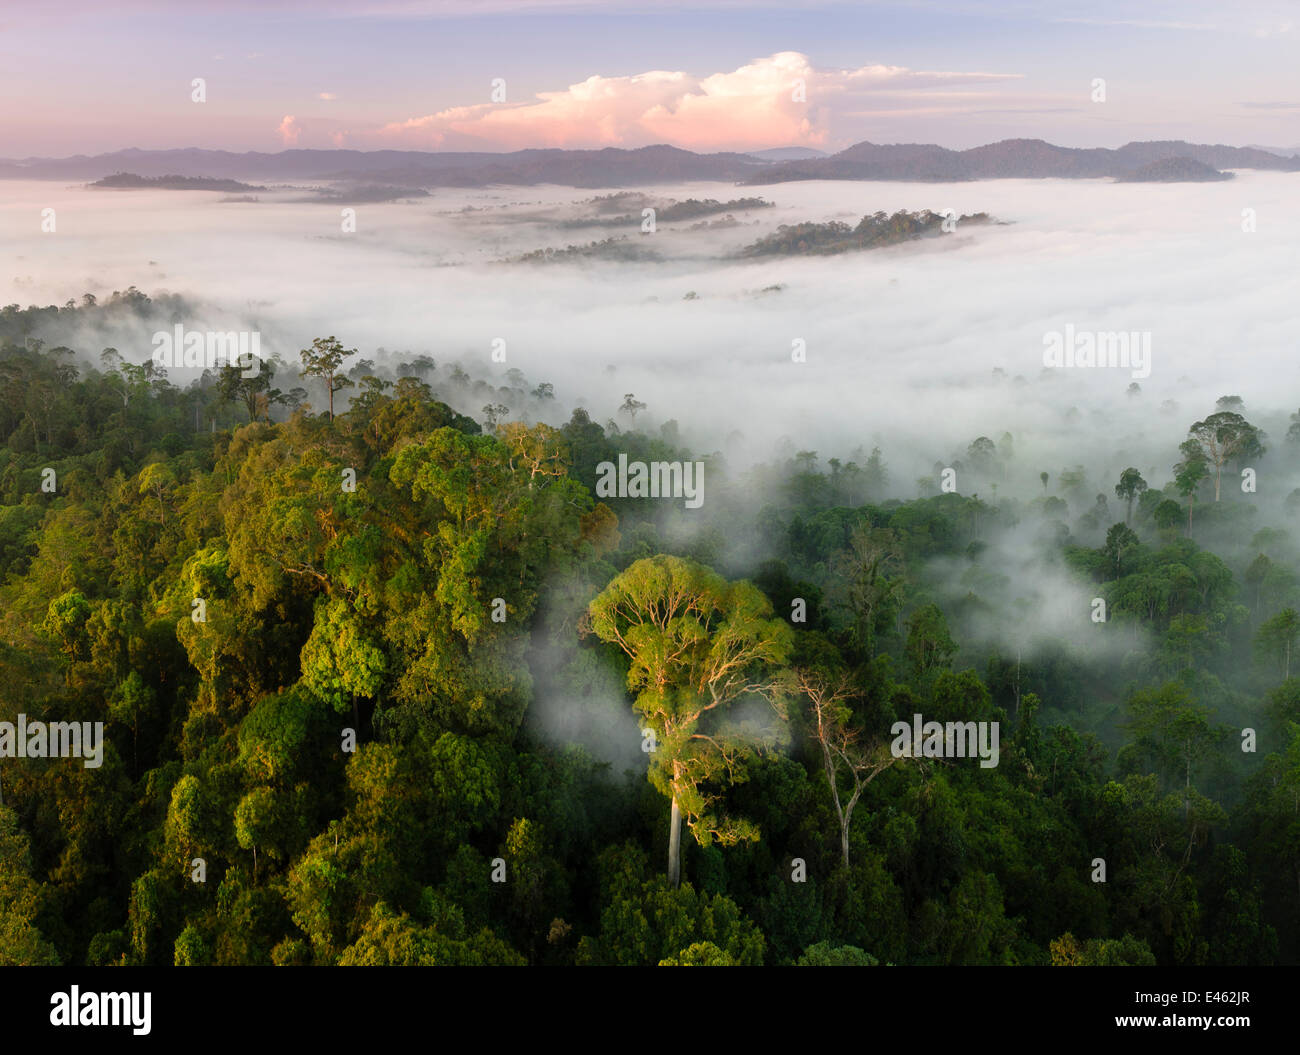 Mist and low cloud hanging over lowland rainforest, just after sunrise, with Menggaris Tree (Koompassia excelsa) prominent in the foreground. Danum Valley, Sabah, Borneo. Stock Photo